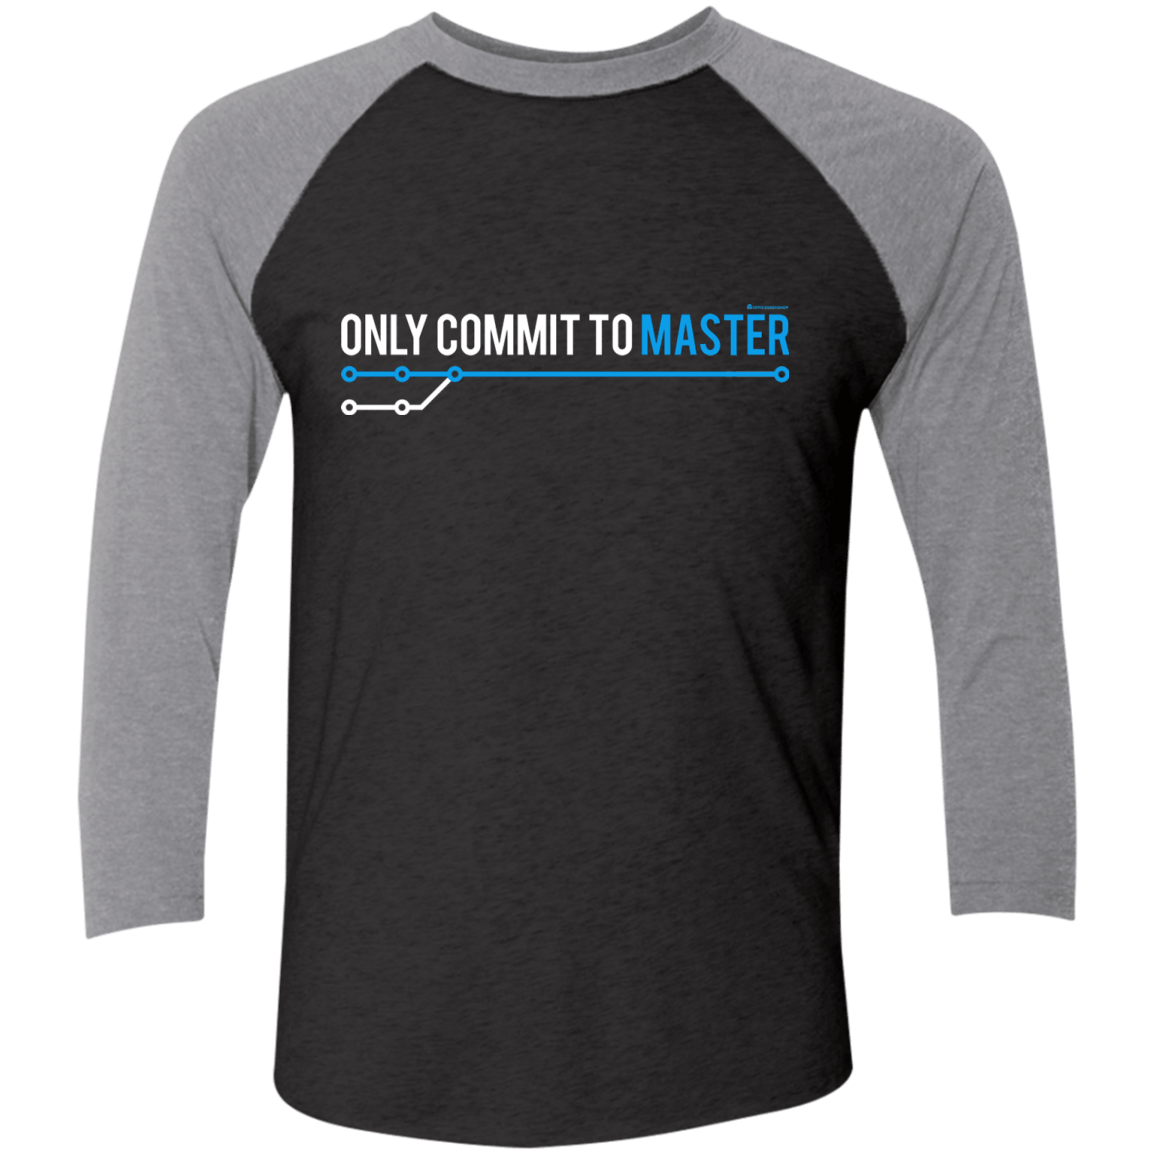 T-Shirts Vintage Black/Premium Heather / X-Small Only Commit To Master Men's Triblend 3/4 Sleeve